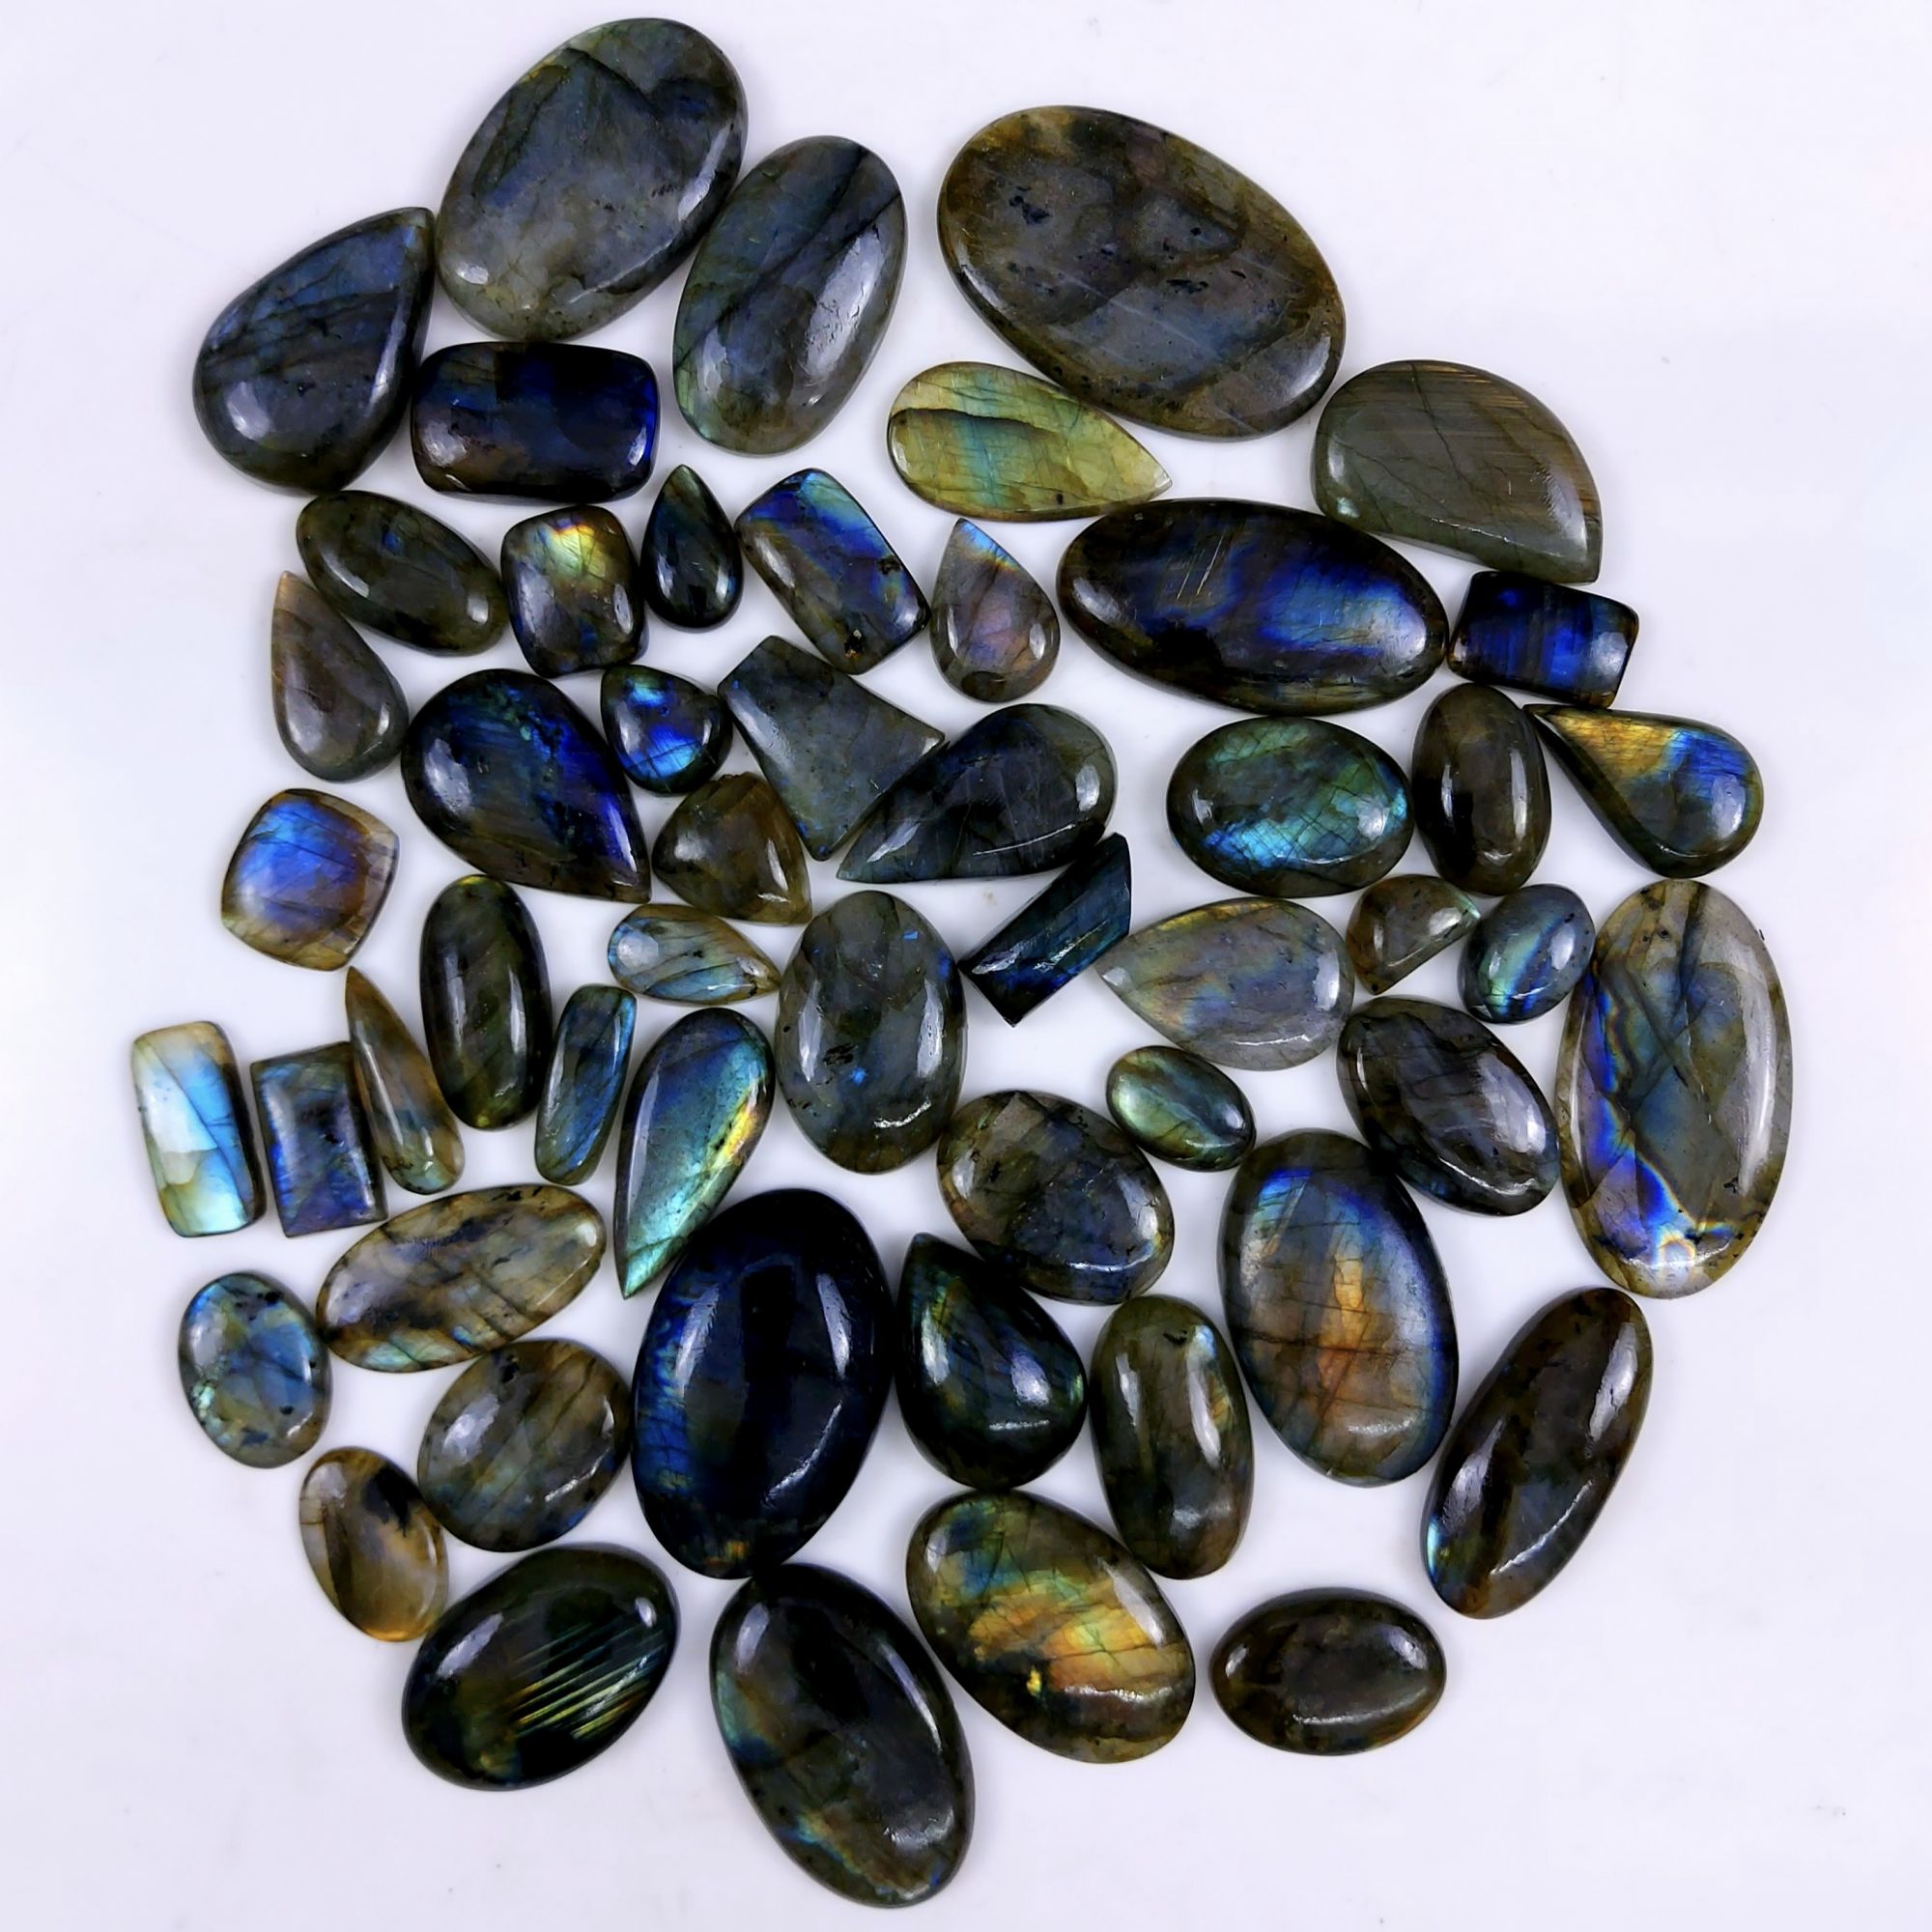 52pc 1644Cts Labradorite Cabochon Multifire Healing Crystal For Jewelry Supplies, Labradorite Necklace Handmade Wire Wrapped Gemstone Pendant 48x25 22x16mm#6363